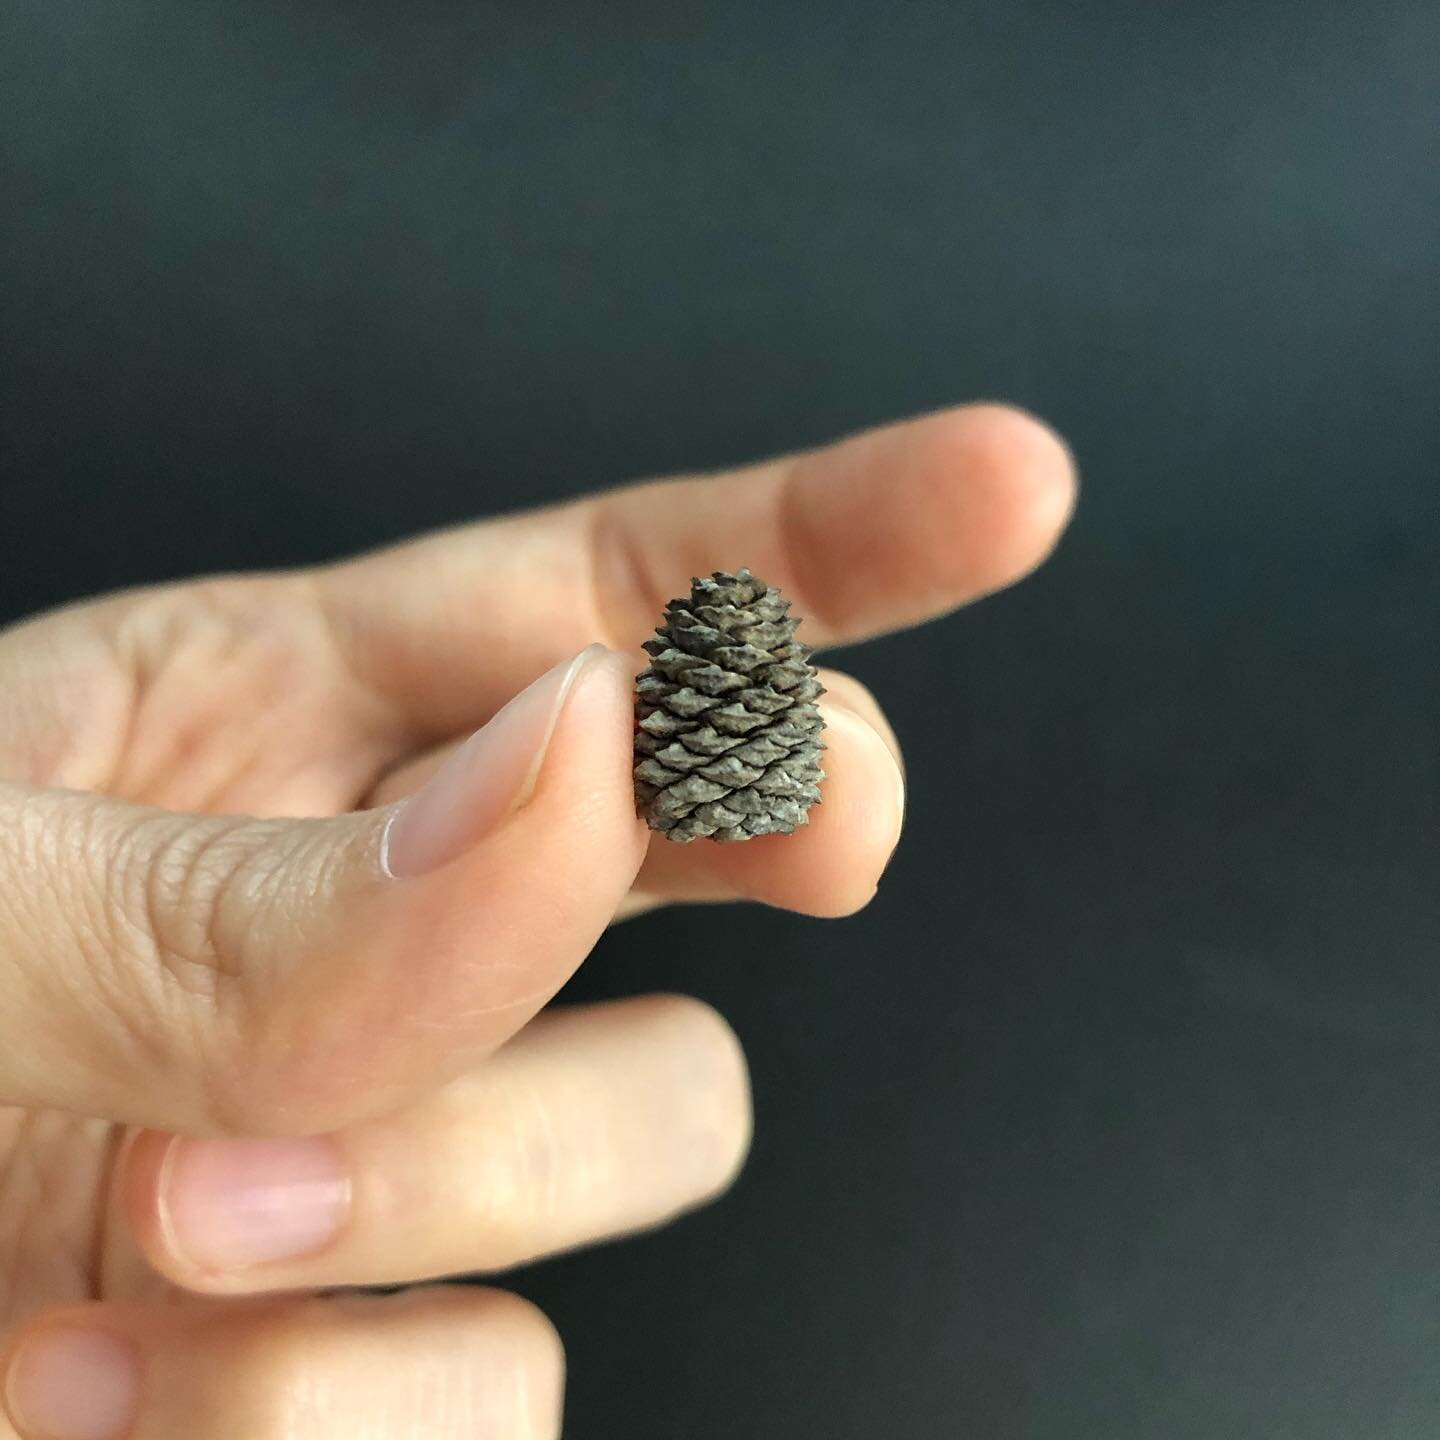 As I was about to go on my daily walk the other day, I saw this tiny pine cone right there on the sidewalk and I couldn&rsquo;t help but feel a lot of joy. It was so tiny and cute and I had always been crazy about tiny man-made things and toys. But t